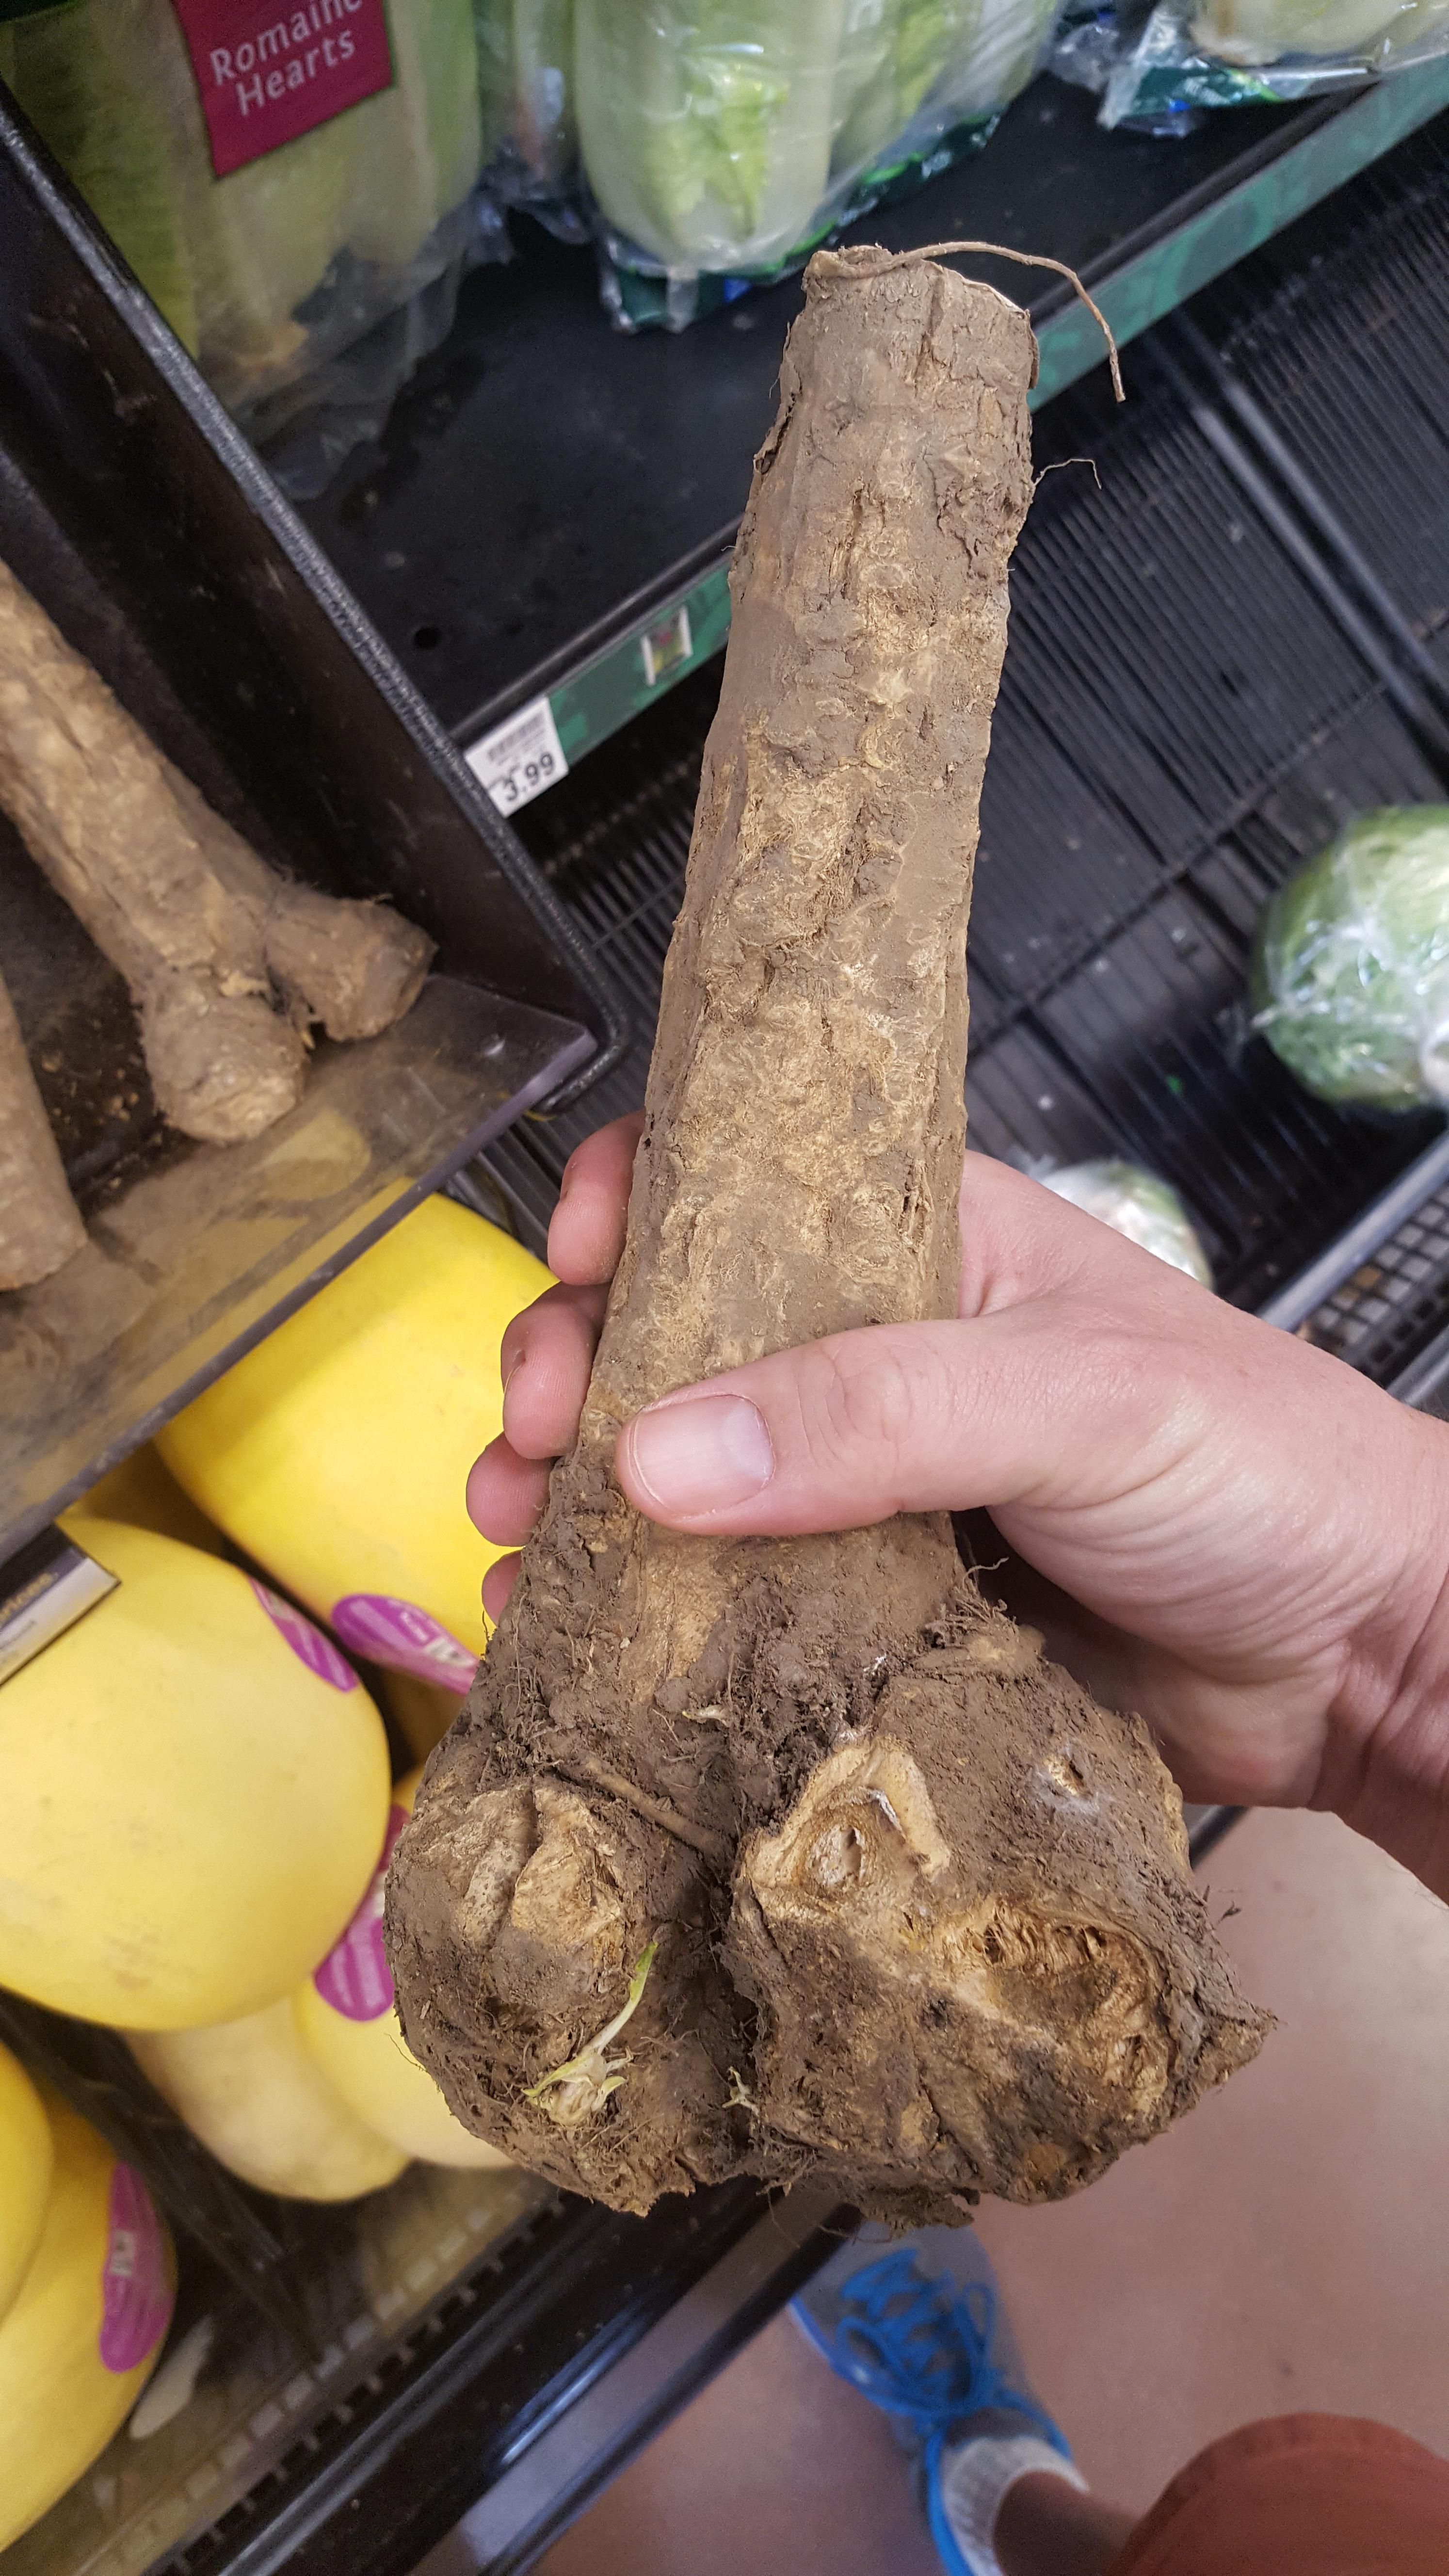 My wife asked me to pick up some "girthy" roots at the store